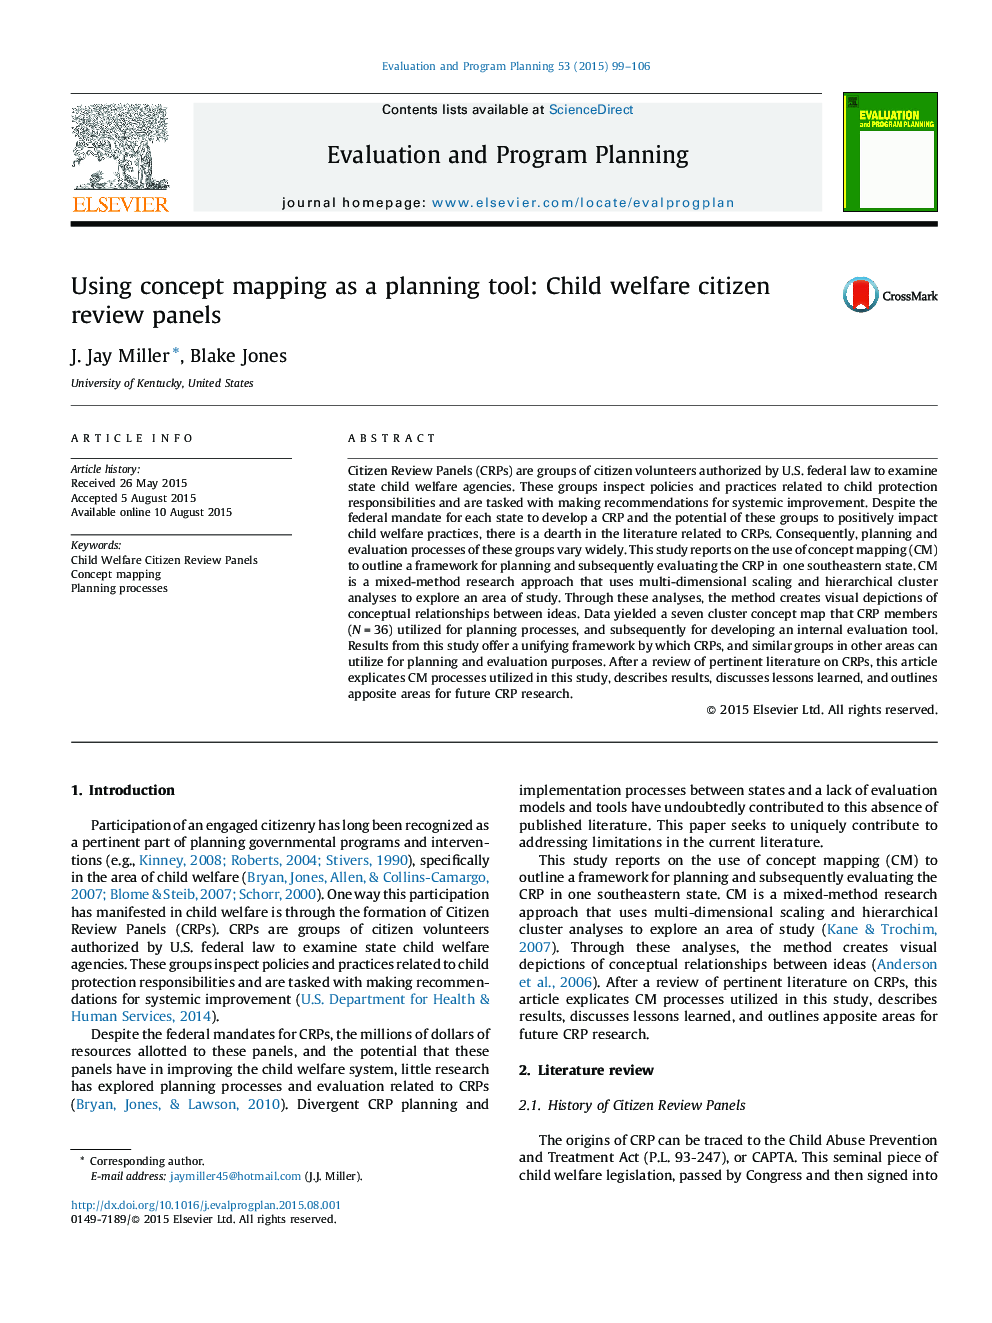 Using concept mapping as a planning tool: Child welfare citizen review panels